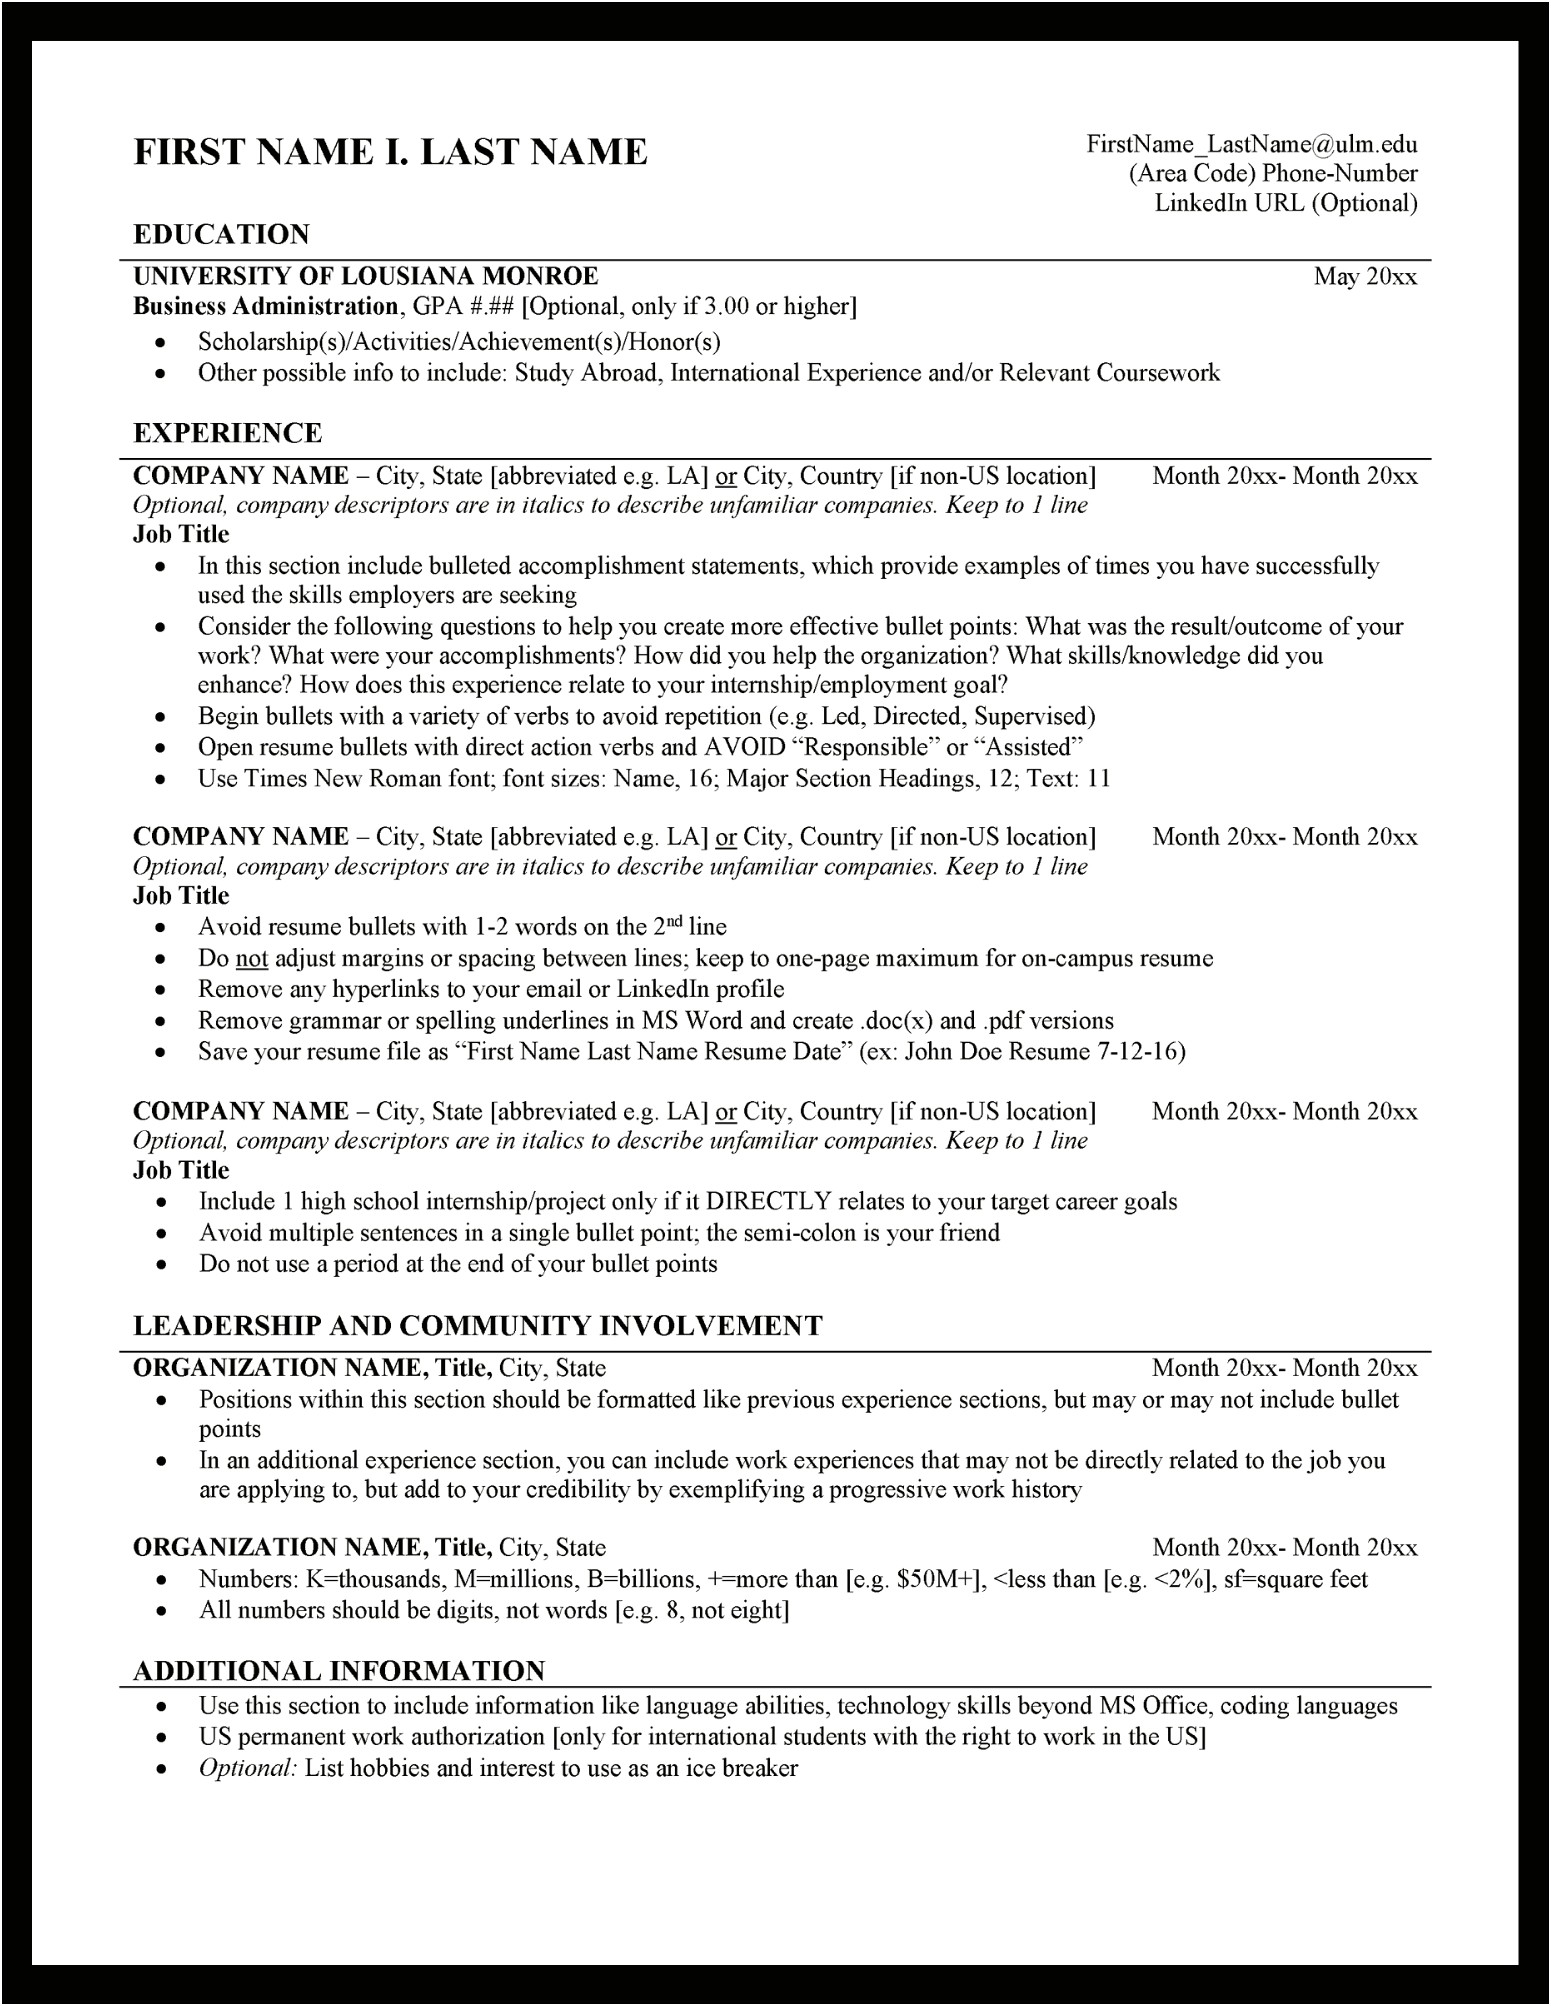 Example Of Study Abroad On Resume